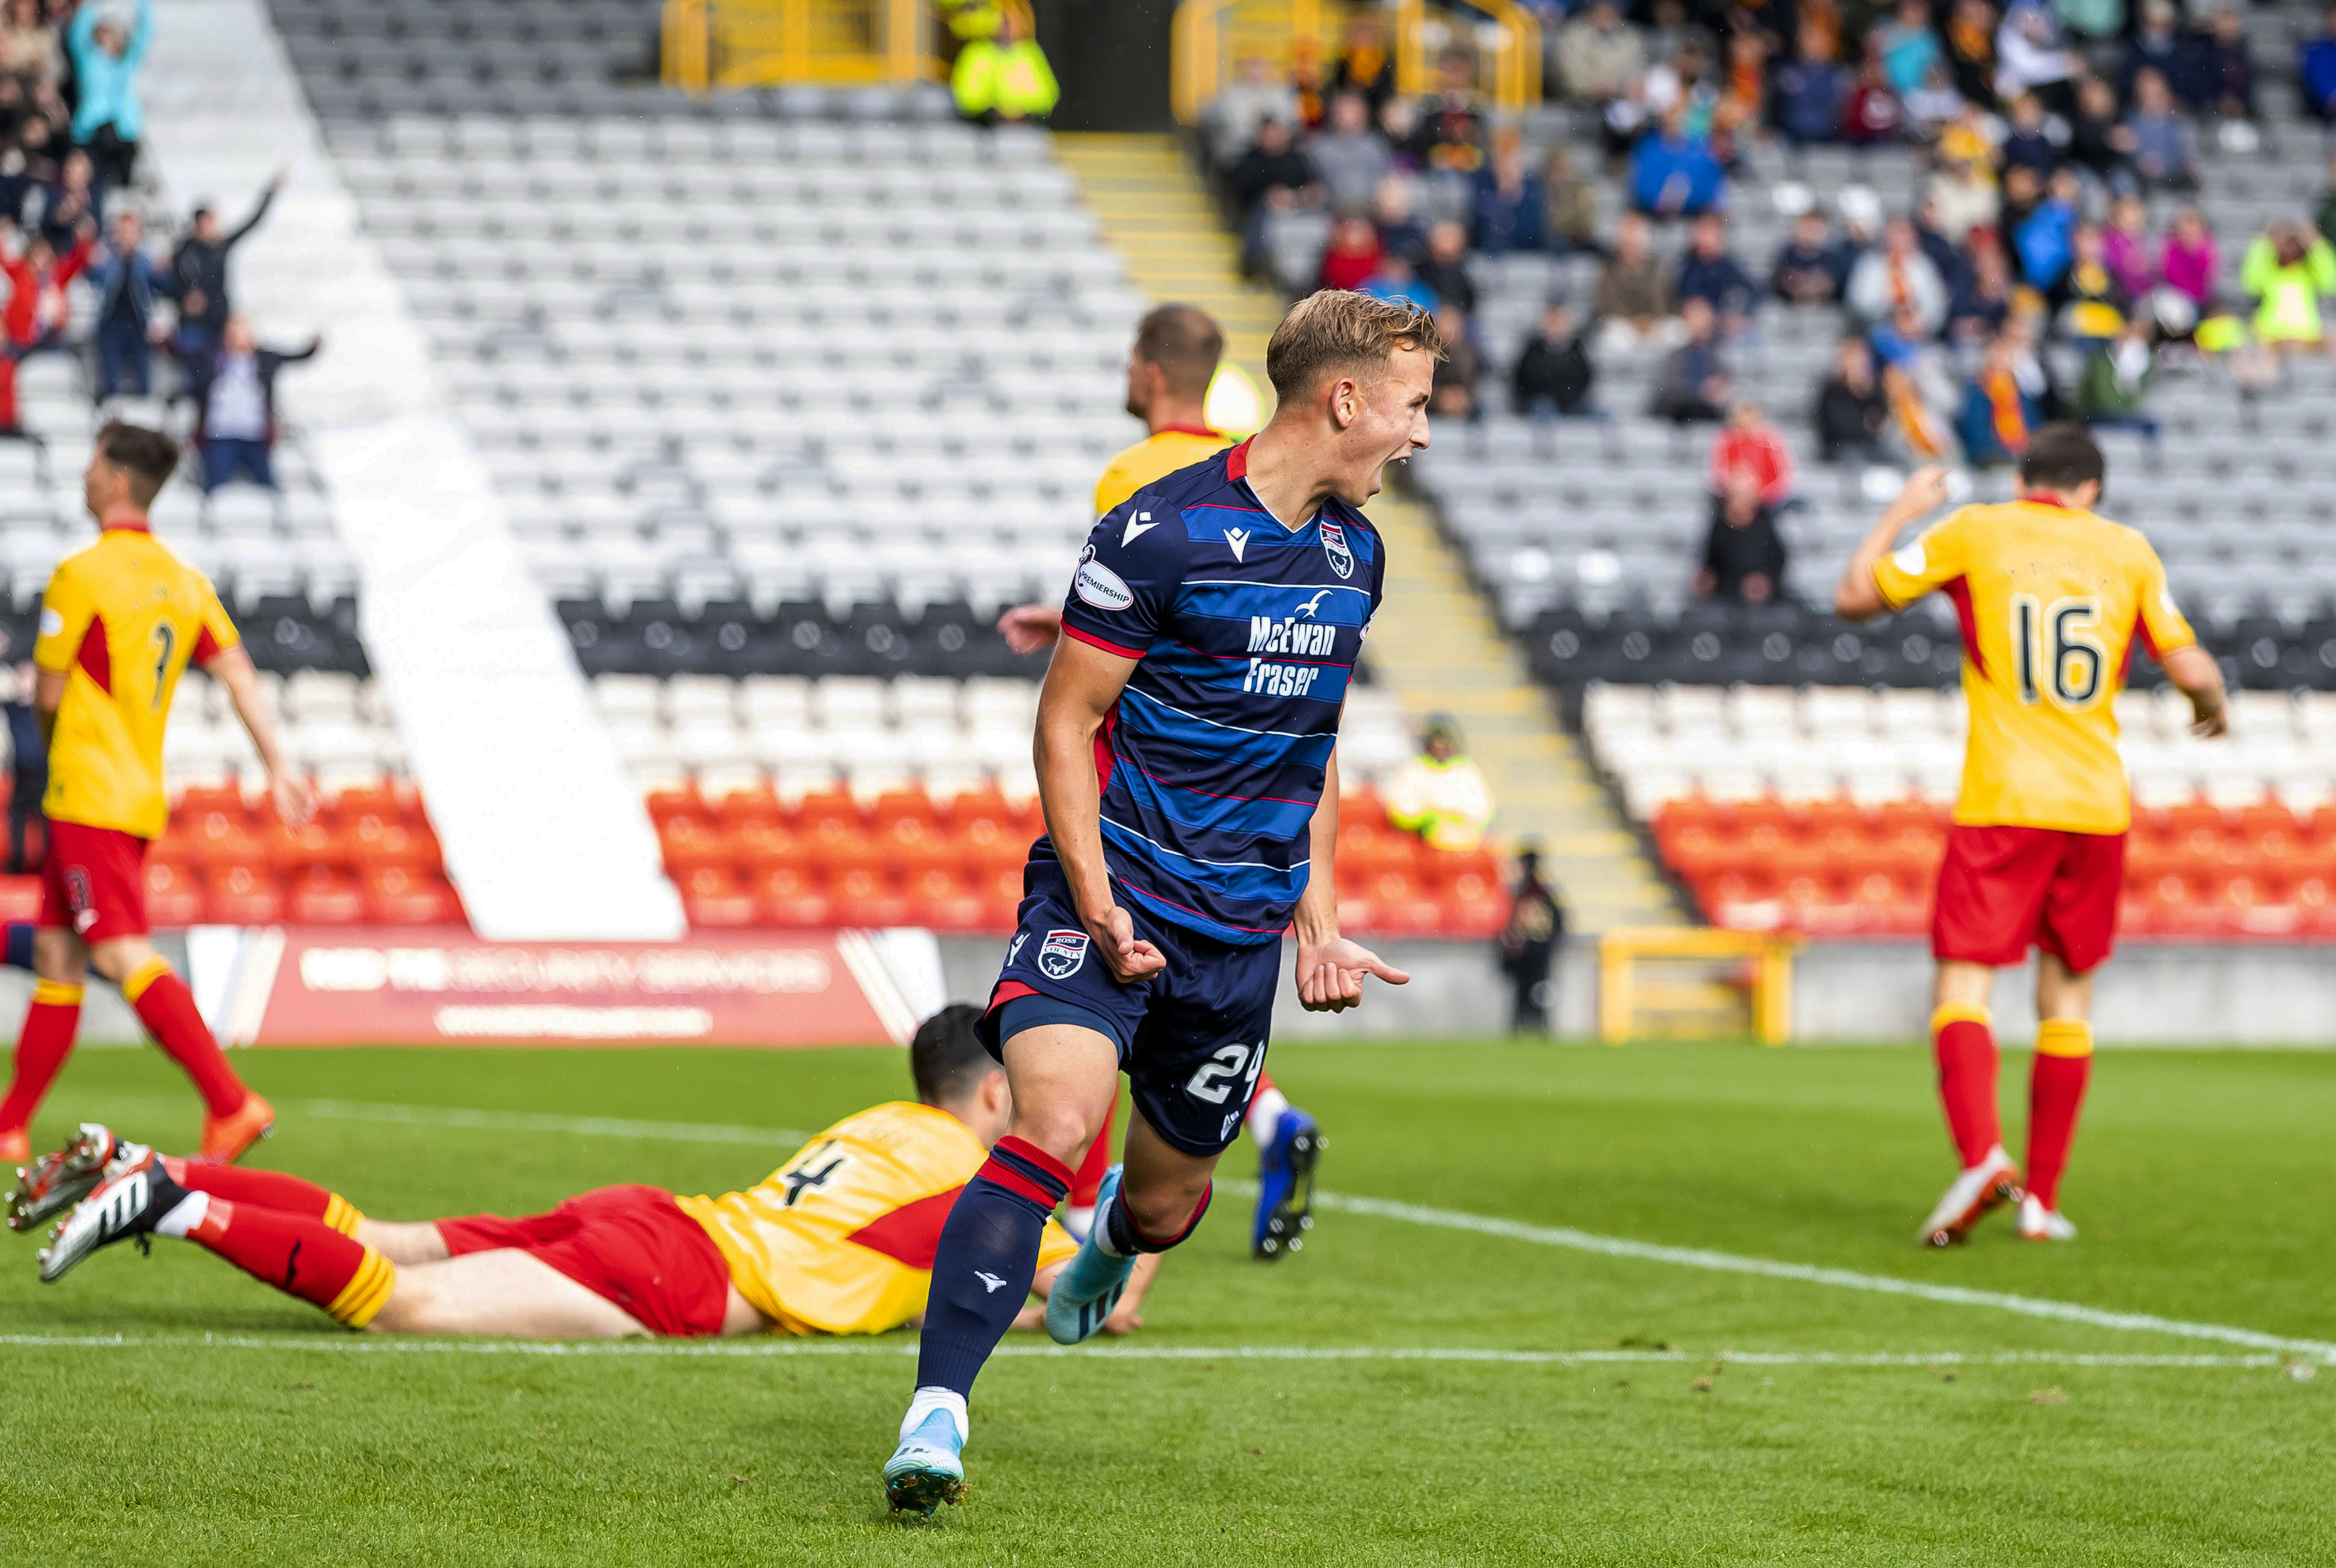 17/08/19 BETFRED CUP SECOND ROUND
PARTICK THISTLE v ROSS COUNTY
THE ENERGY CHECK STADIUM - GLASGOW
Ross County's Harry Paton celebrates making it 2-2